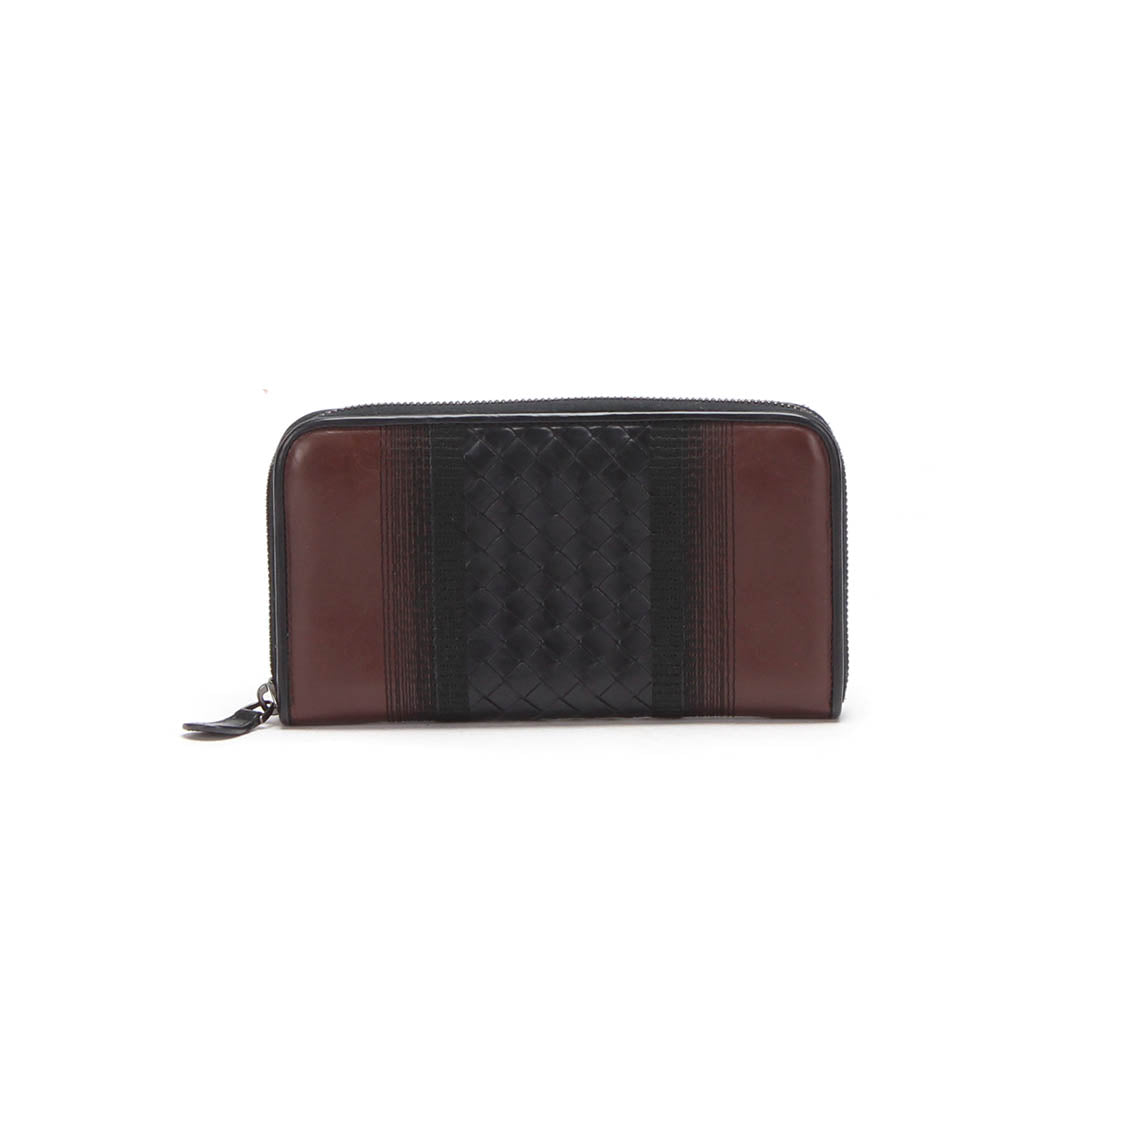 Intrecciato-Trimmed Leather Wallet